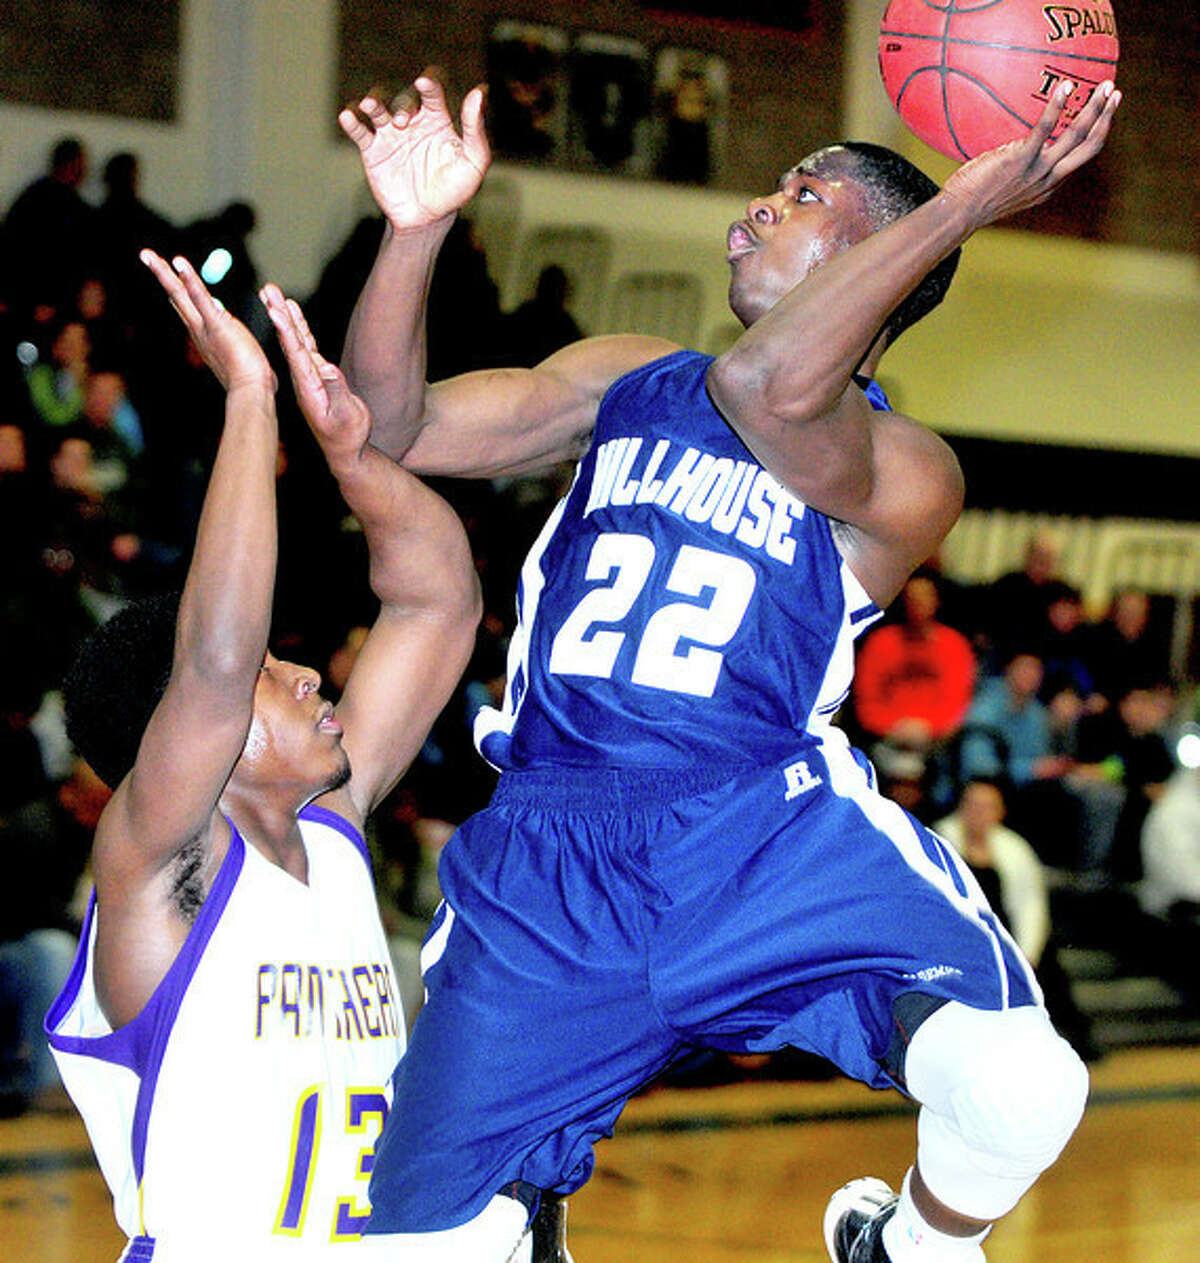 Amos Ford (left) of Career defends against Shane Christie of Hillhouse in the first half of the SCC Boys Basketball Semifinal in East Haven on 3/3/2014. Photo: Arnold Gold / Register